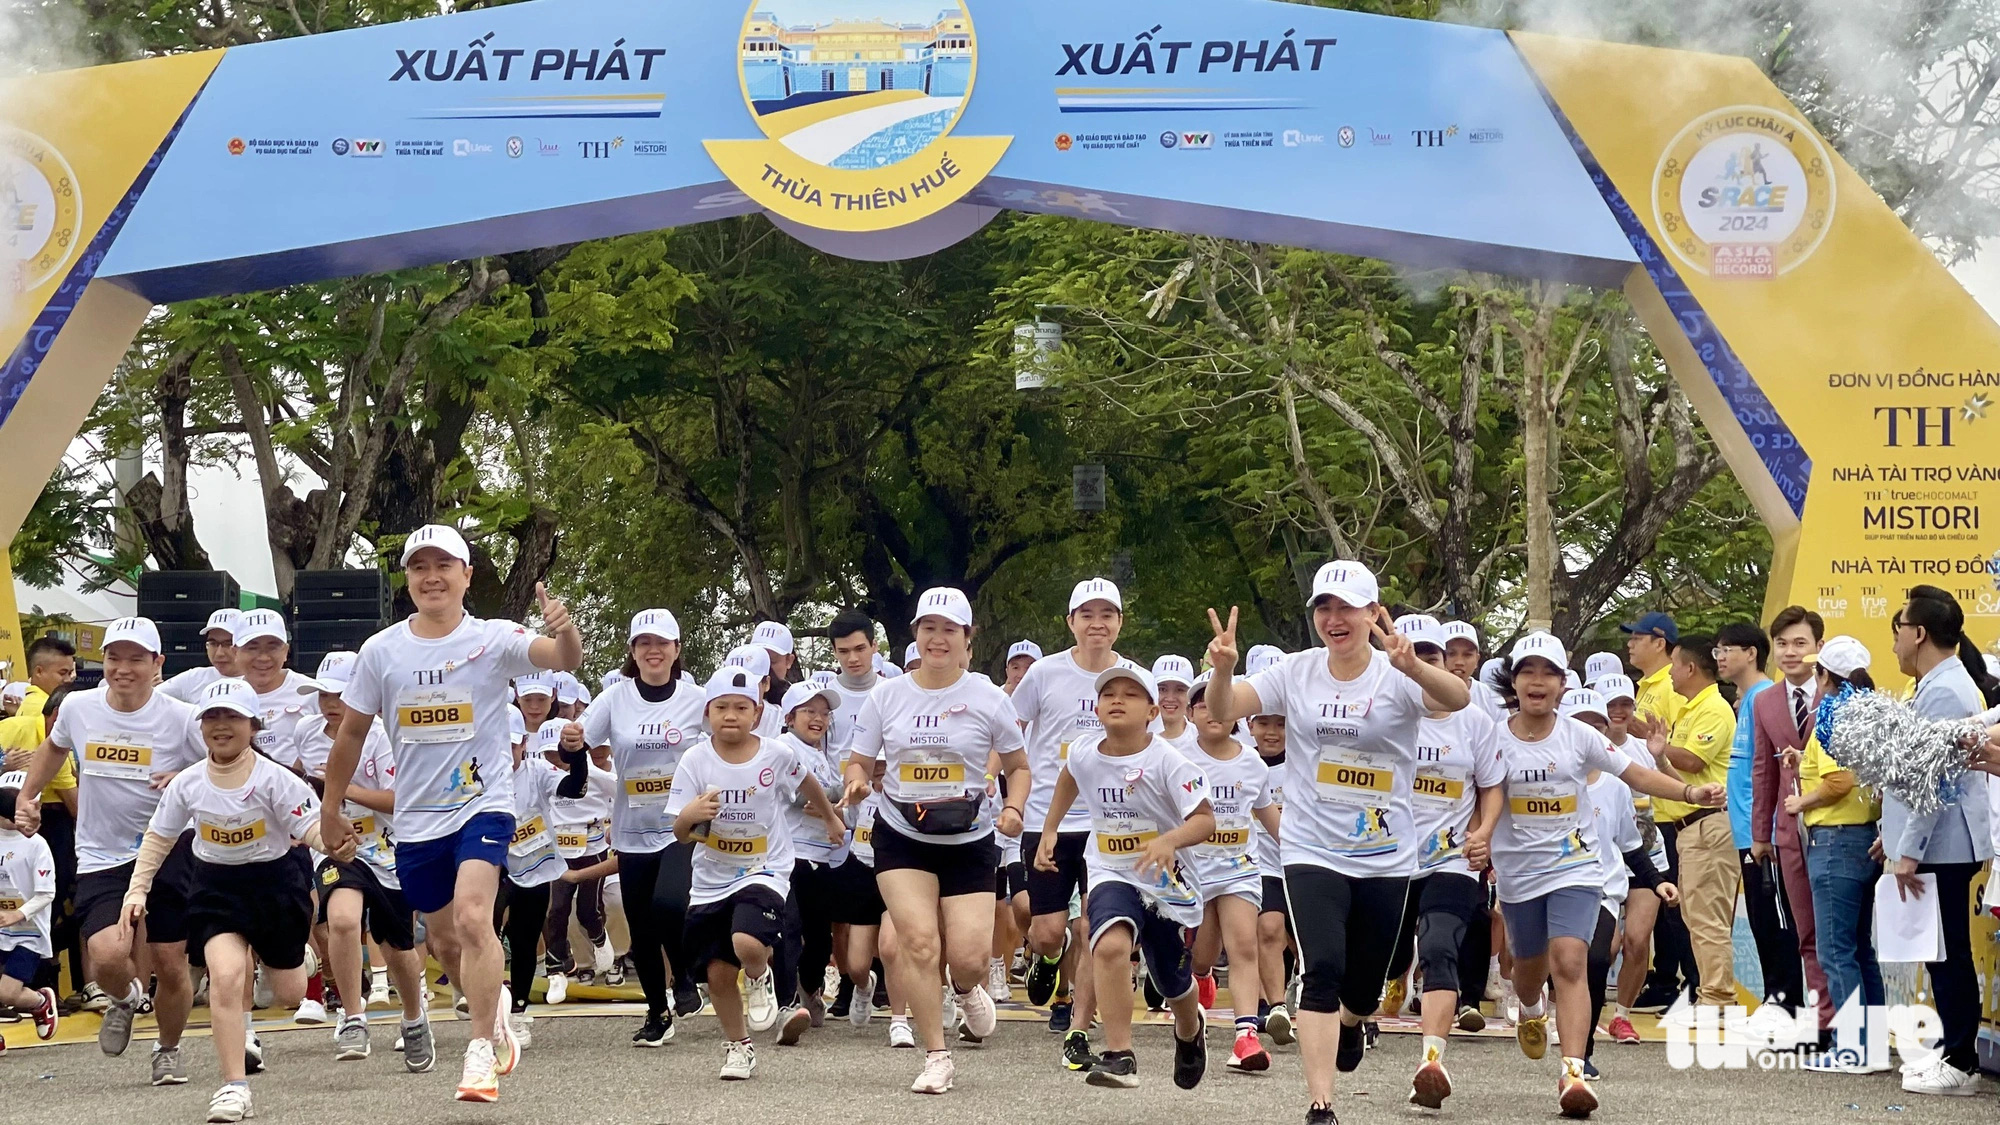 Over 15,000 join S-Race 2024 student running event in central Vietnam